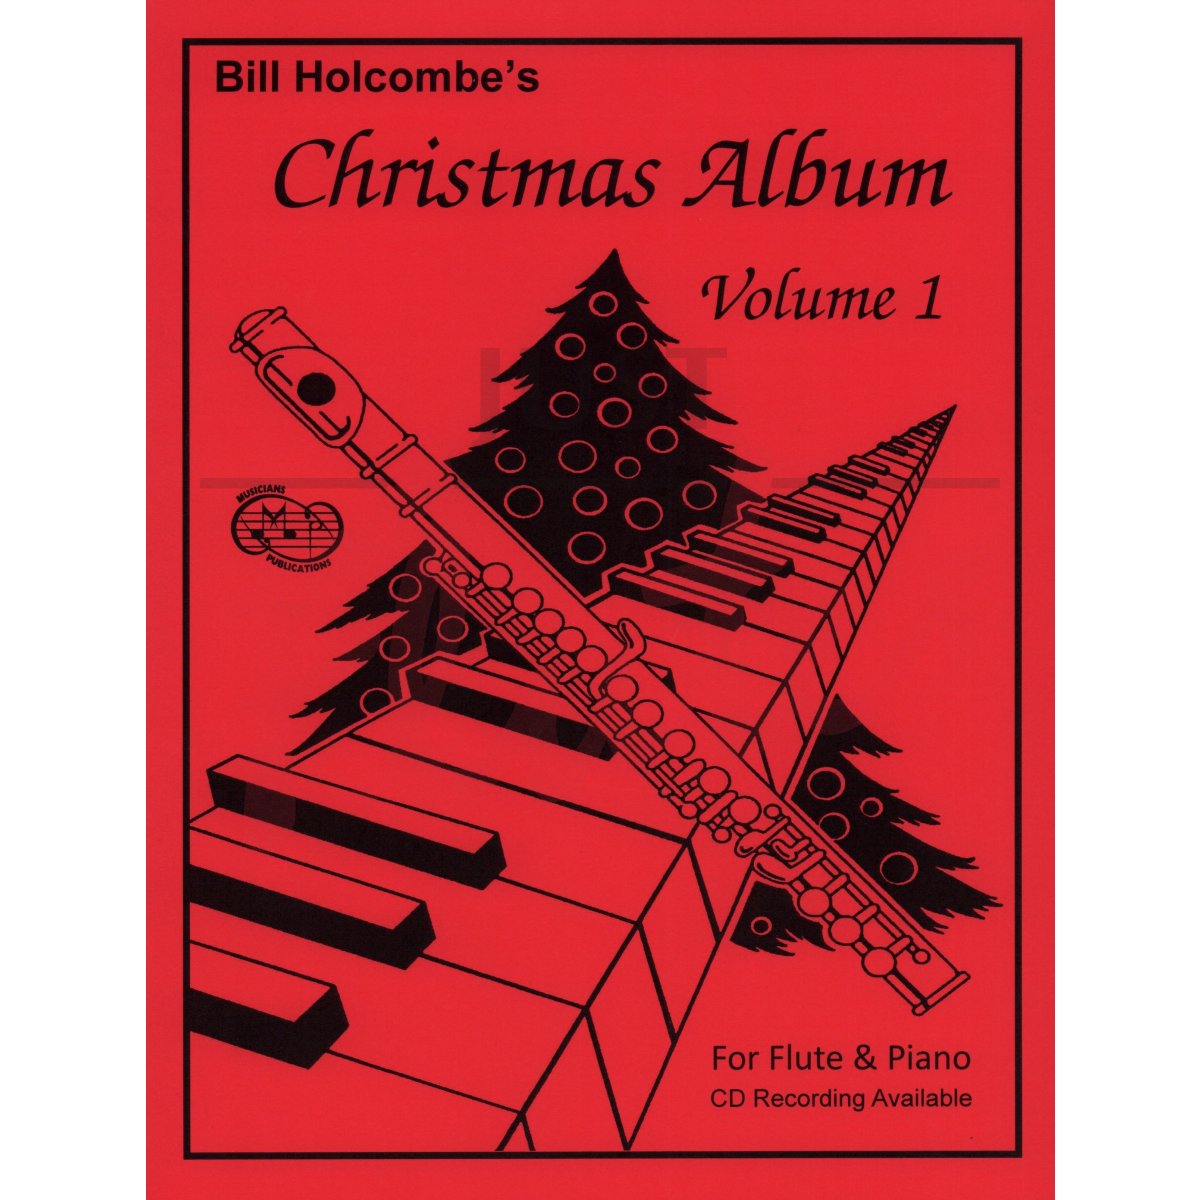 Bill Holcombe's Christmas Album for Flute and Piano, Vol 1